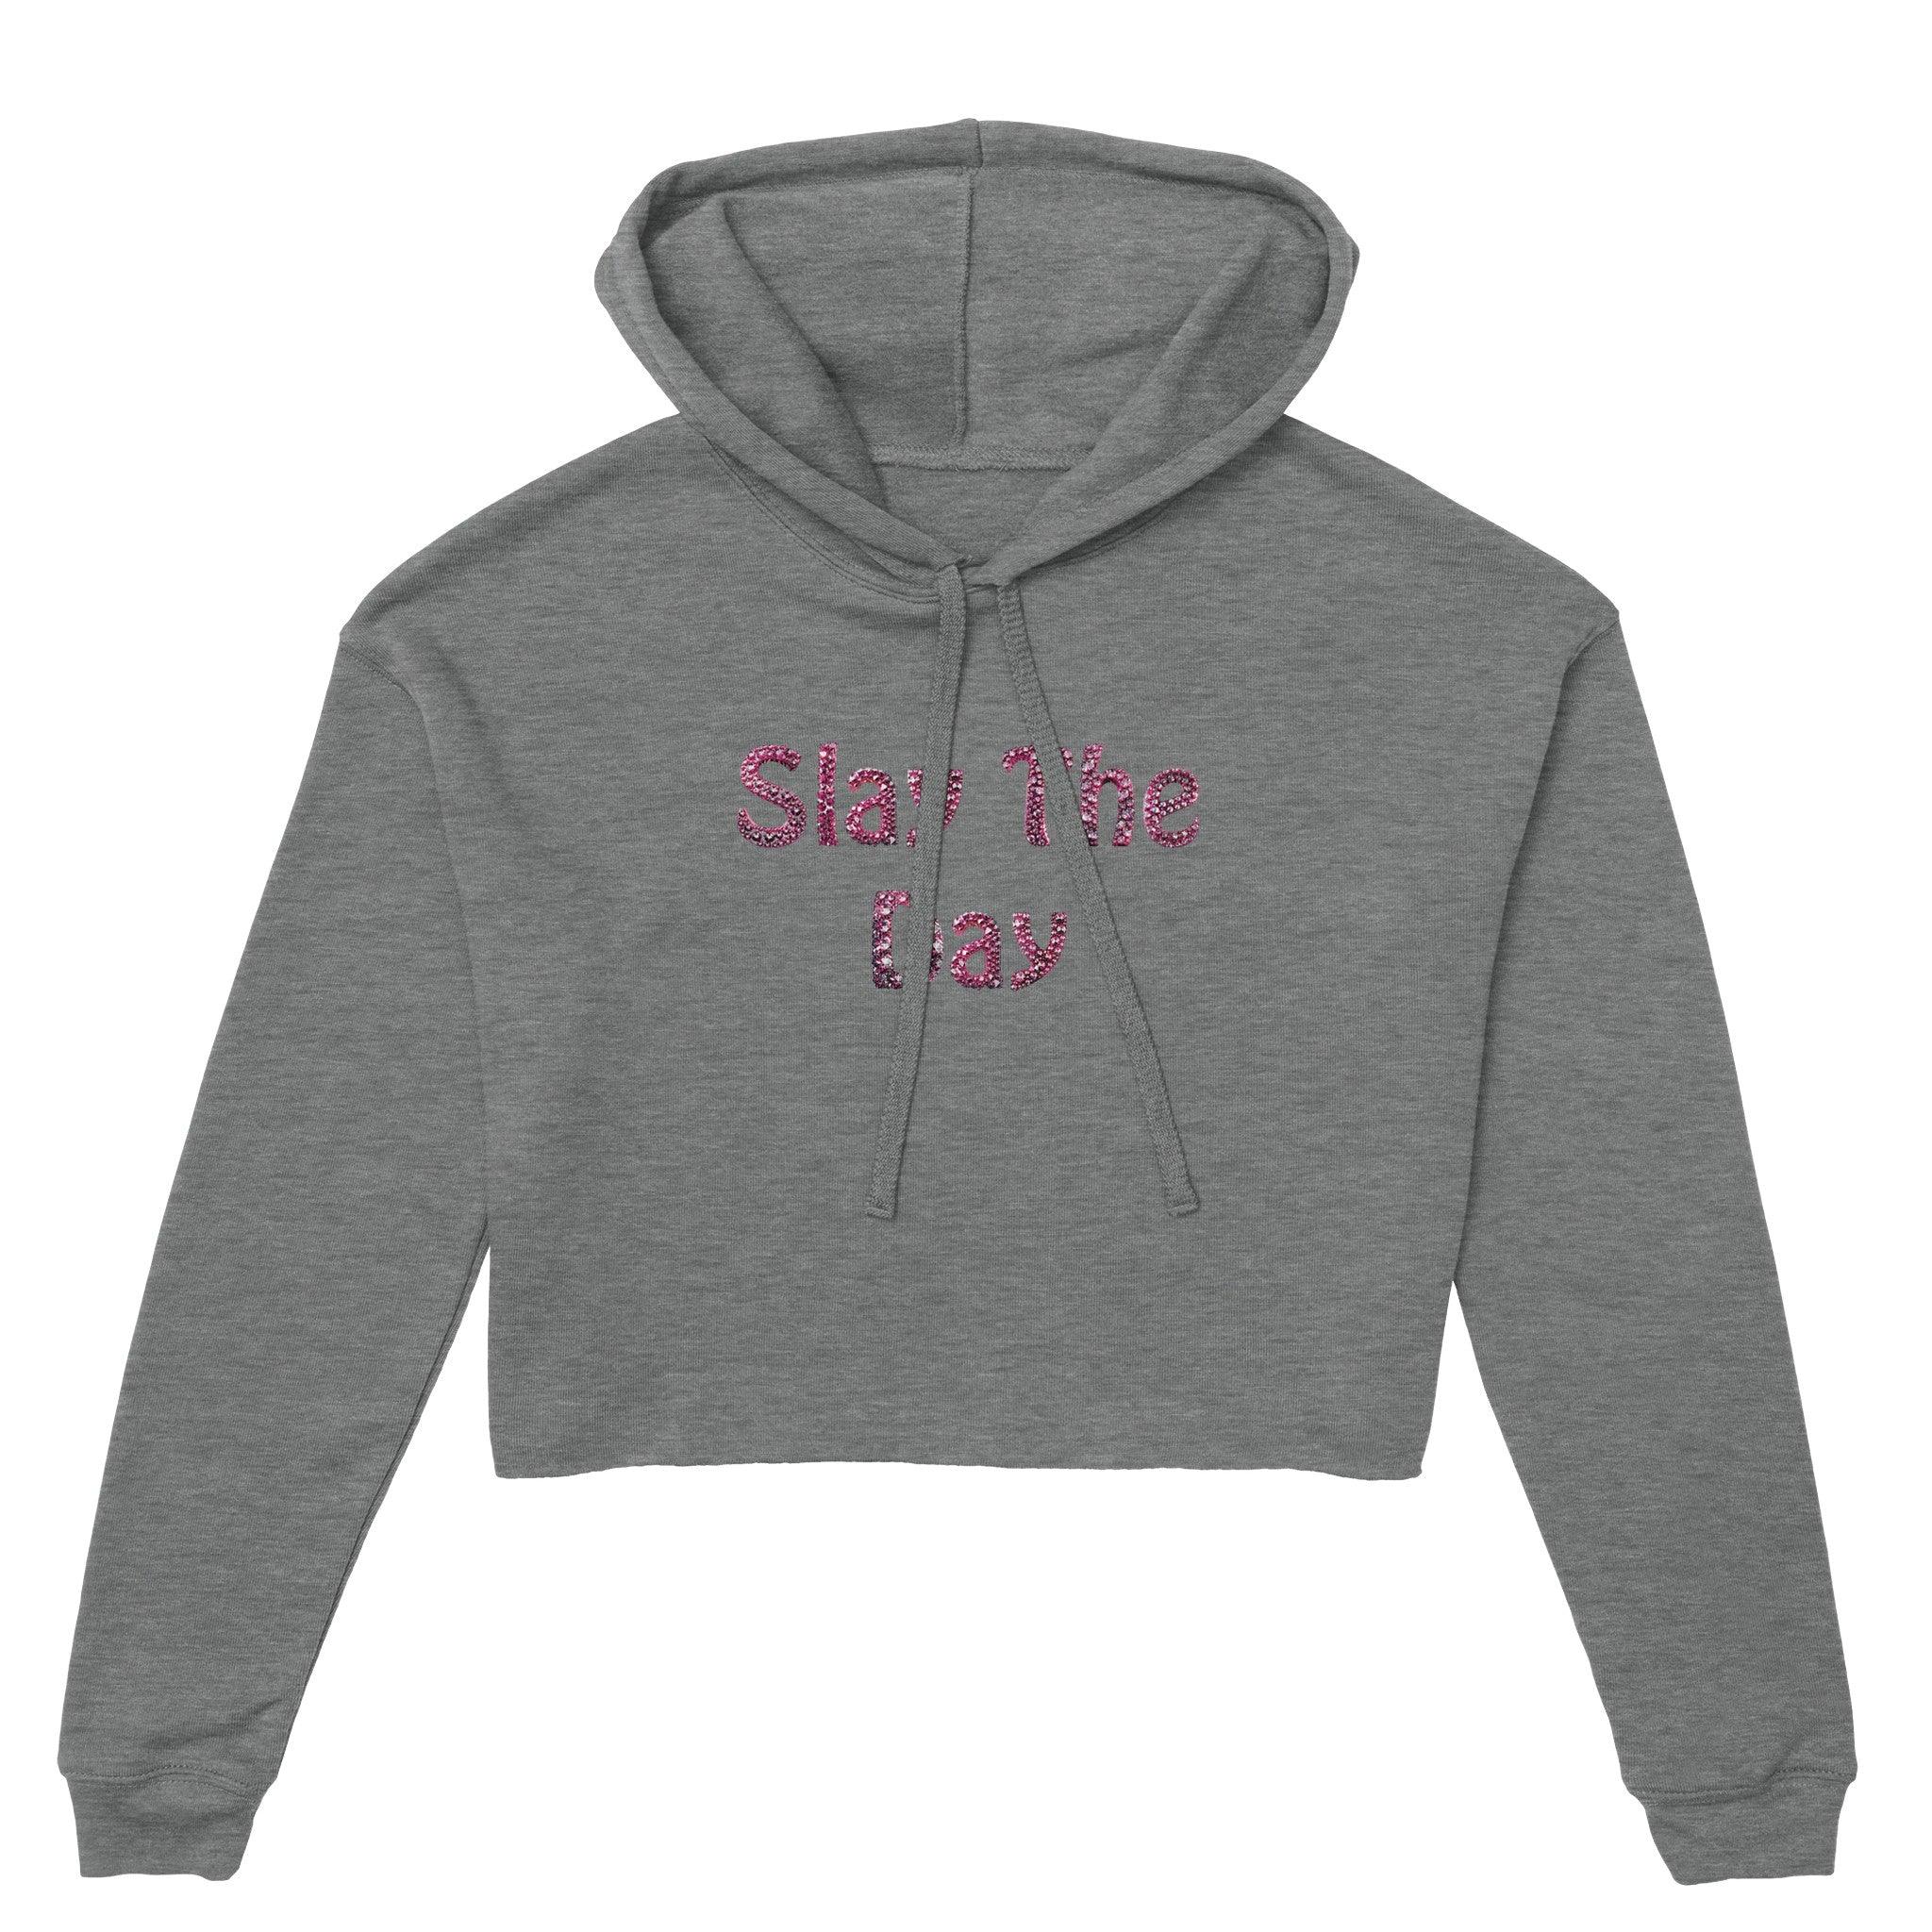 'Slay the day' Cropped Hoodie - POMA